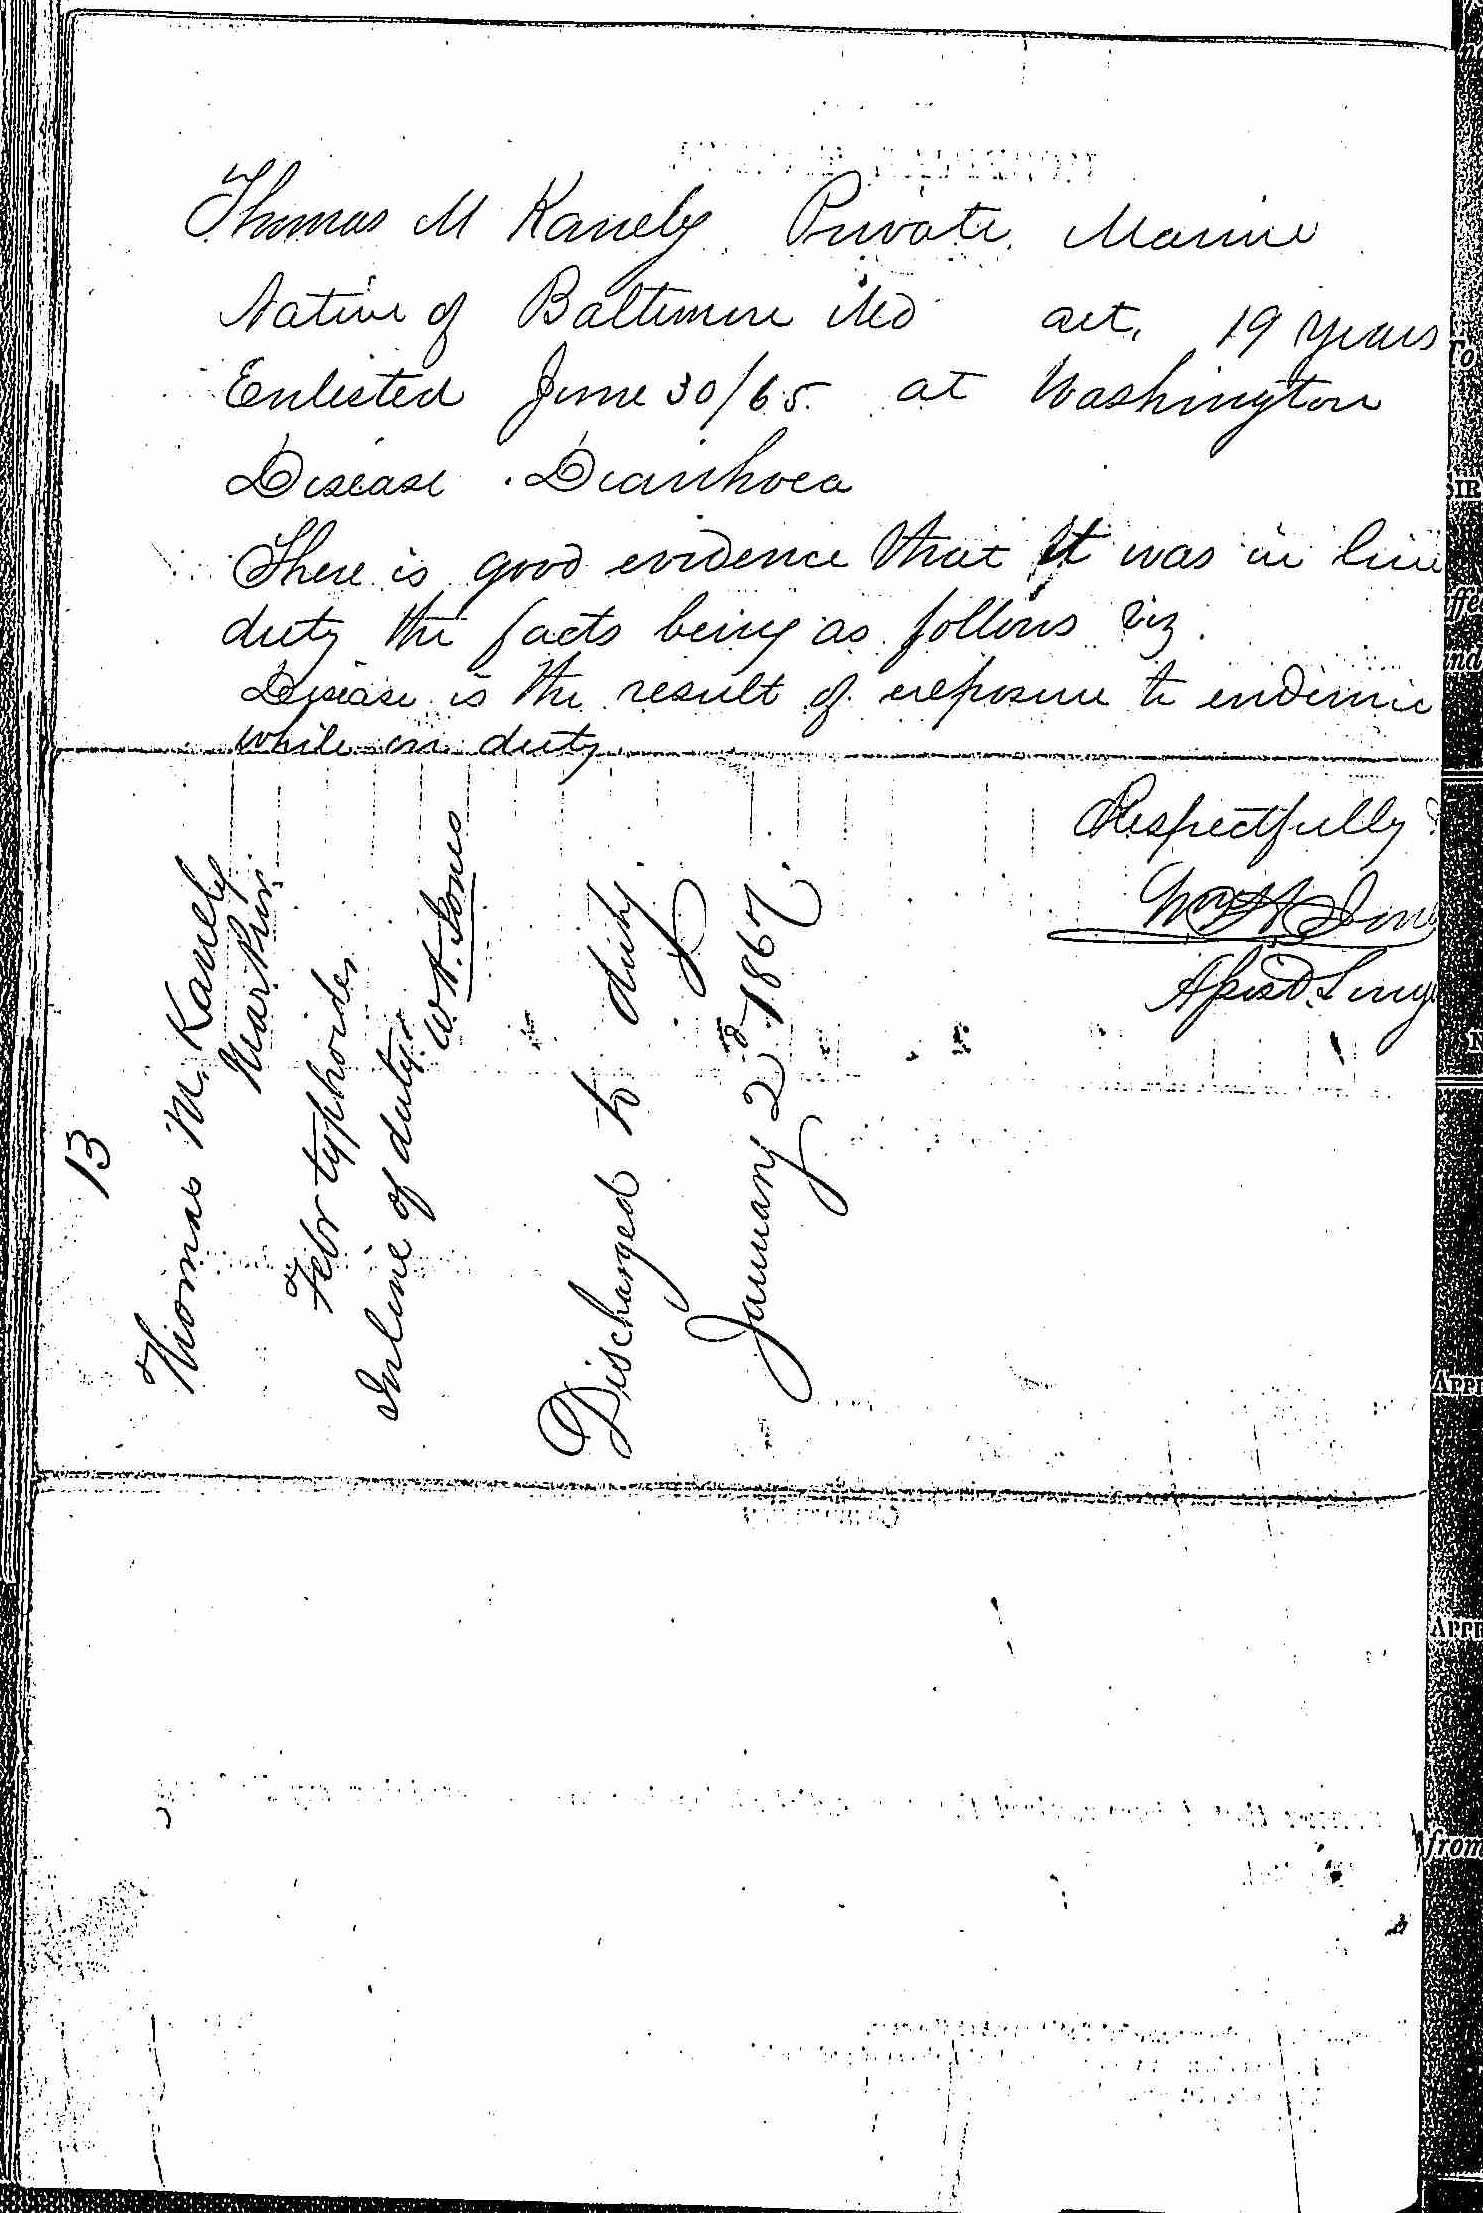 Entry for Thomas Kanely (page 2 of 2) in the log Hospital Tickets and Case Papers - Naval Hospital - Washington, D.C. - 1865-68